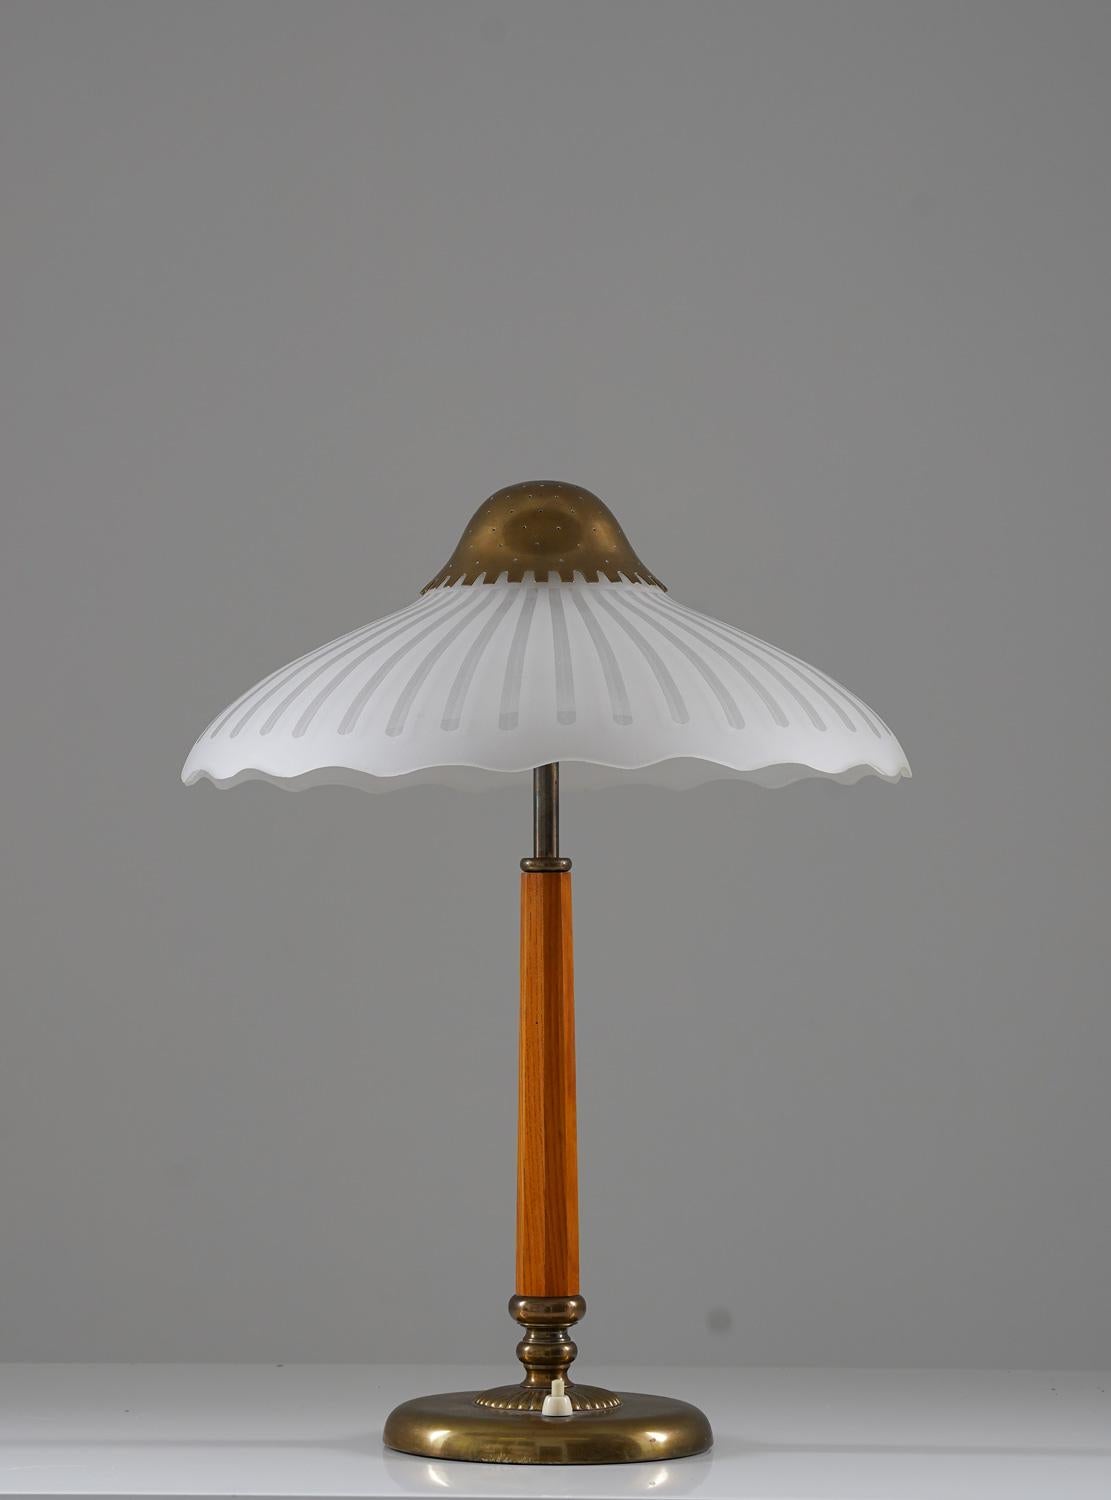 Very rare table lamp manufactured by ASEA (Sweden), 1940s. 
The lamp consists of a brass base with a wooden pole, supporting the shade of frosted glass. The shade is held in place by a perforated brass cover, giving a beautiful light.